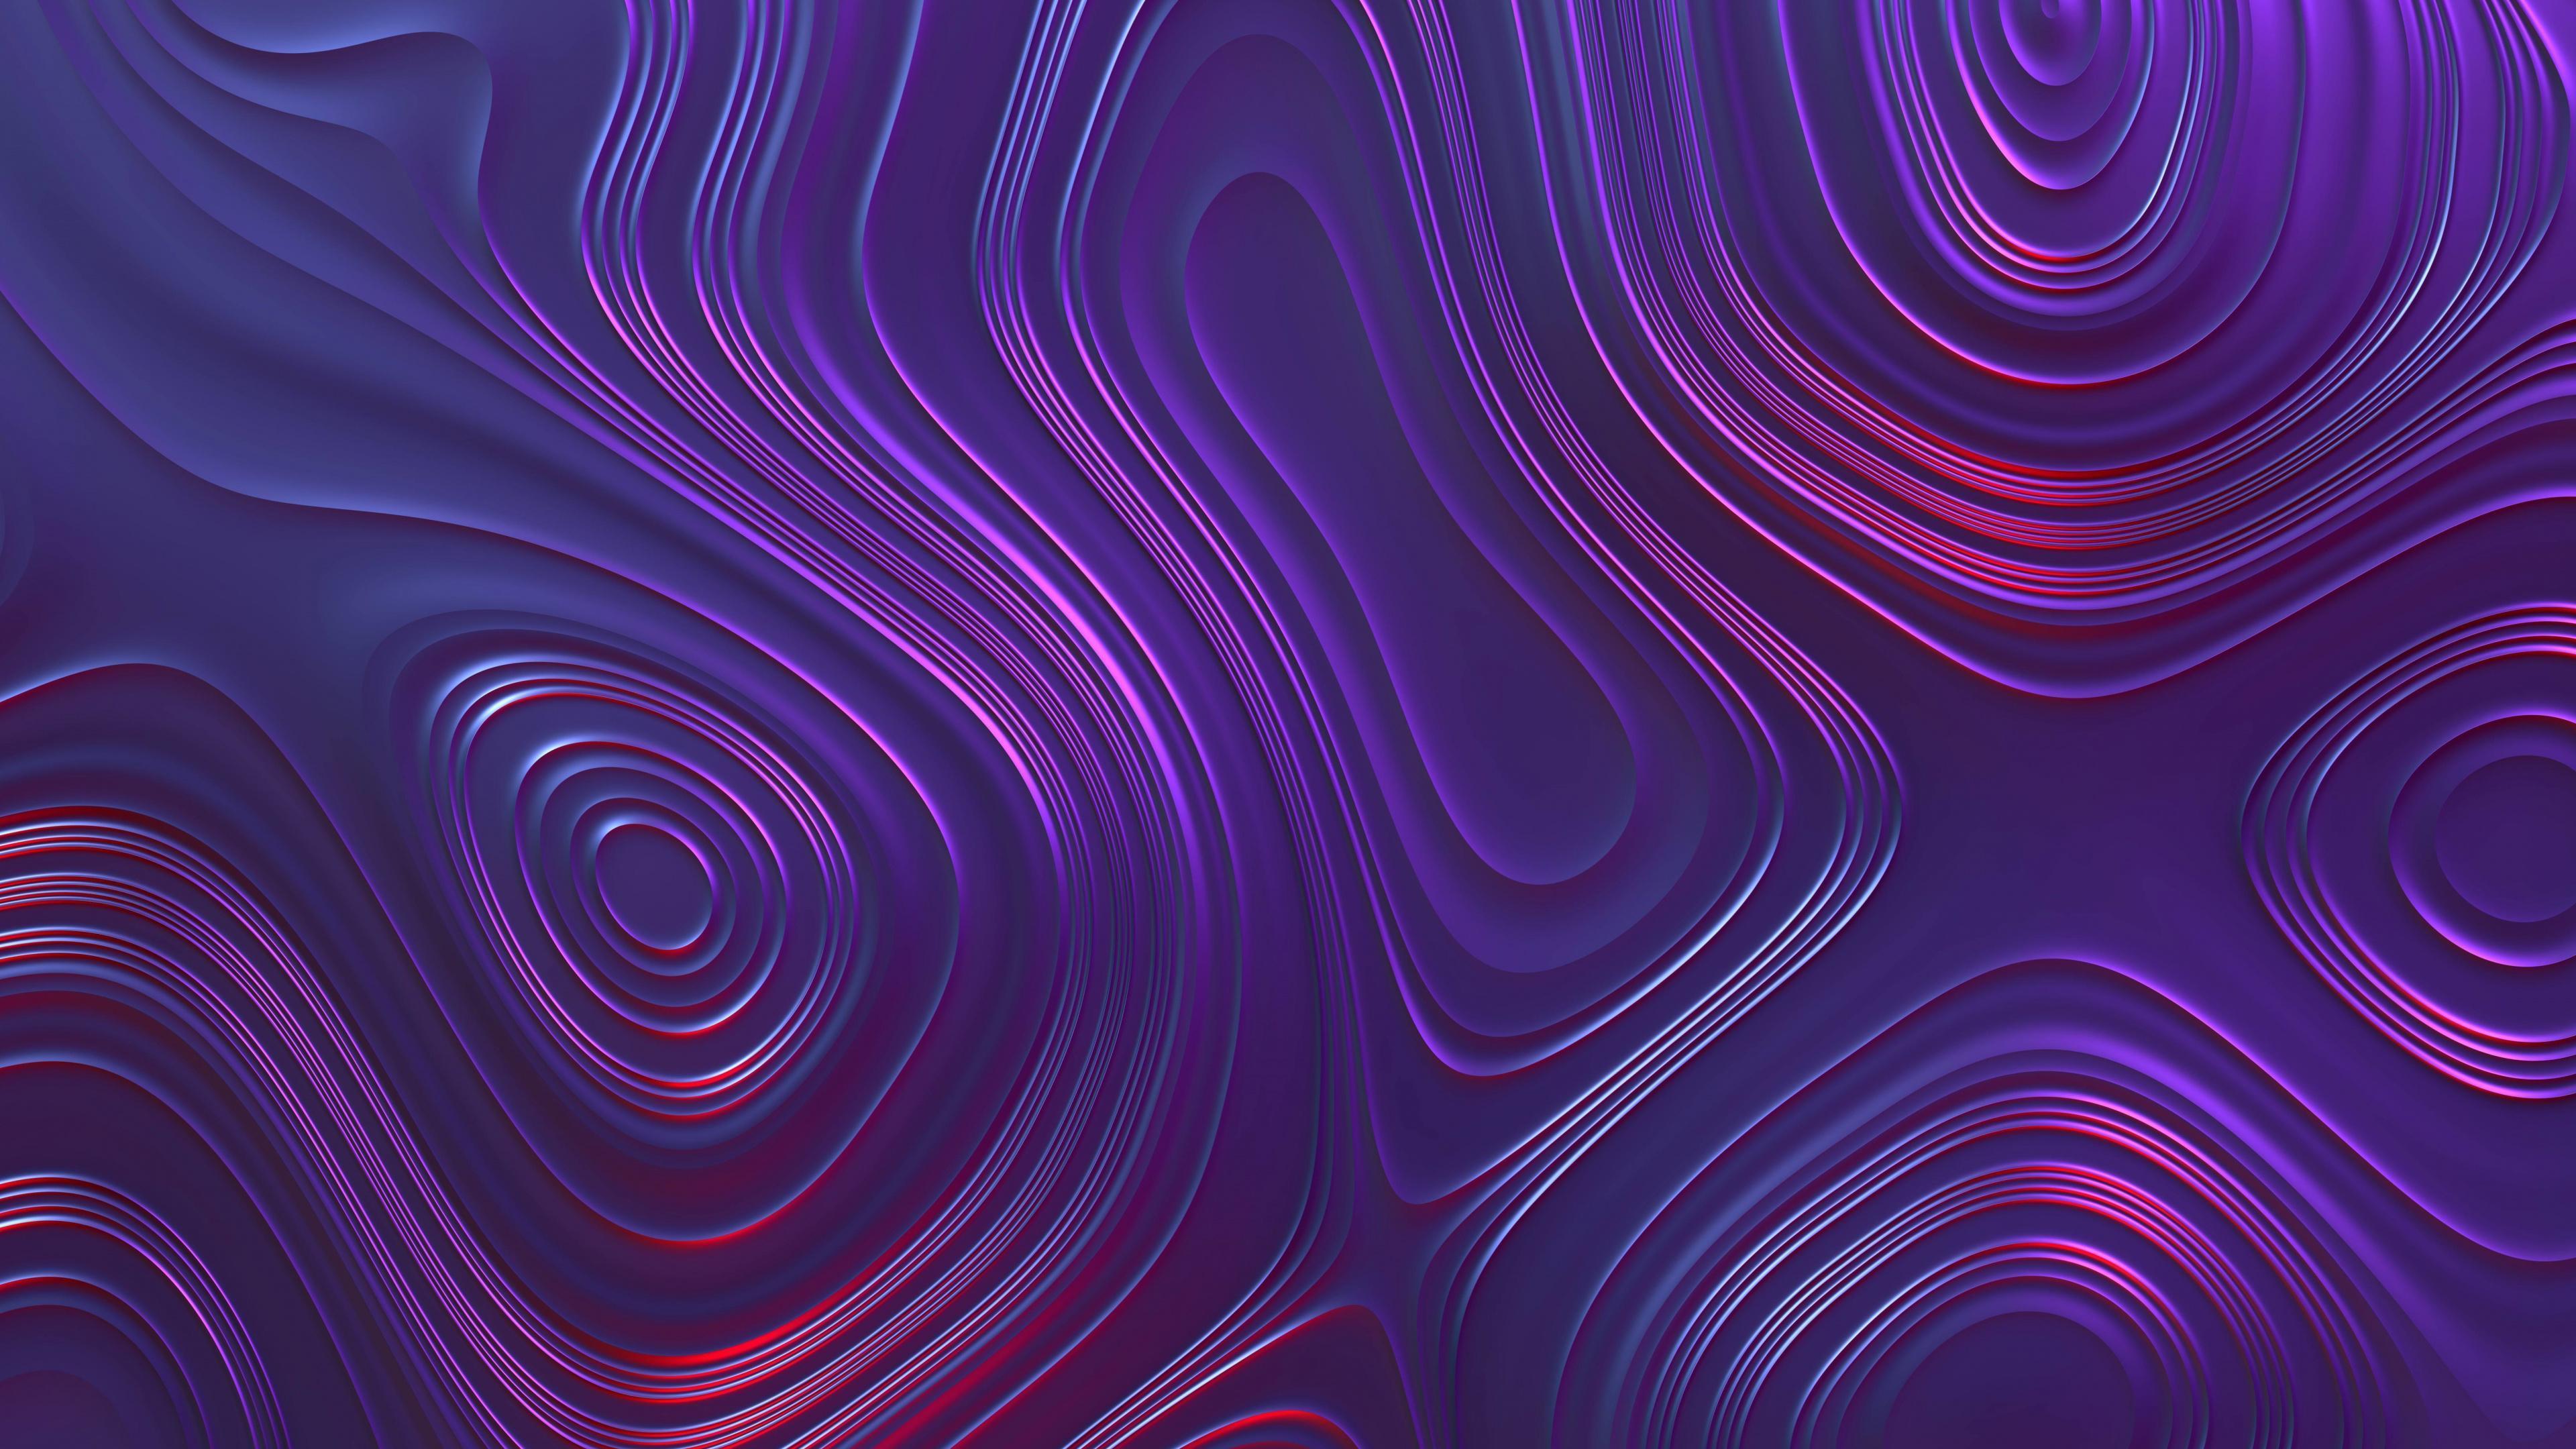 3840 x 2160 · jpeg - Waves Abstract 4k Wallpapers - Wallpaper Cave